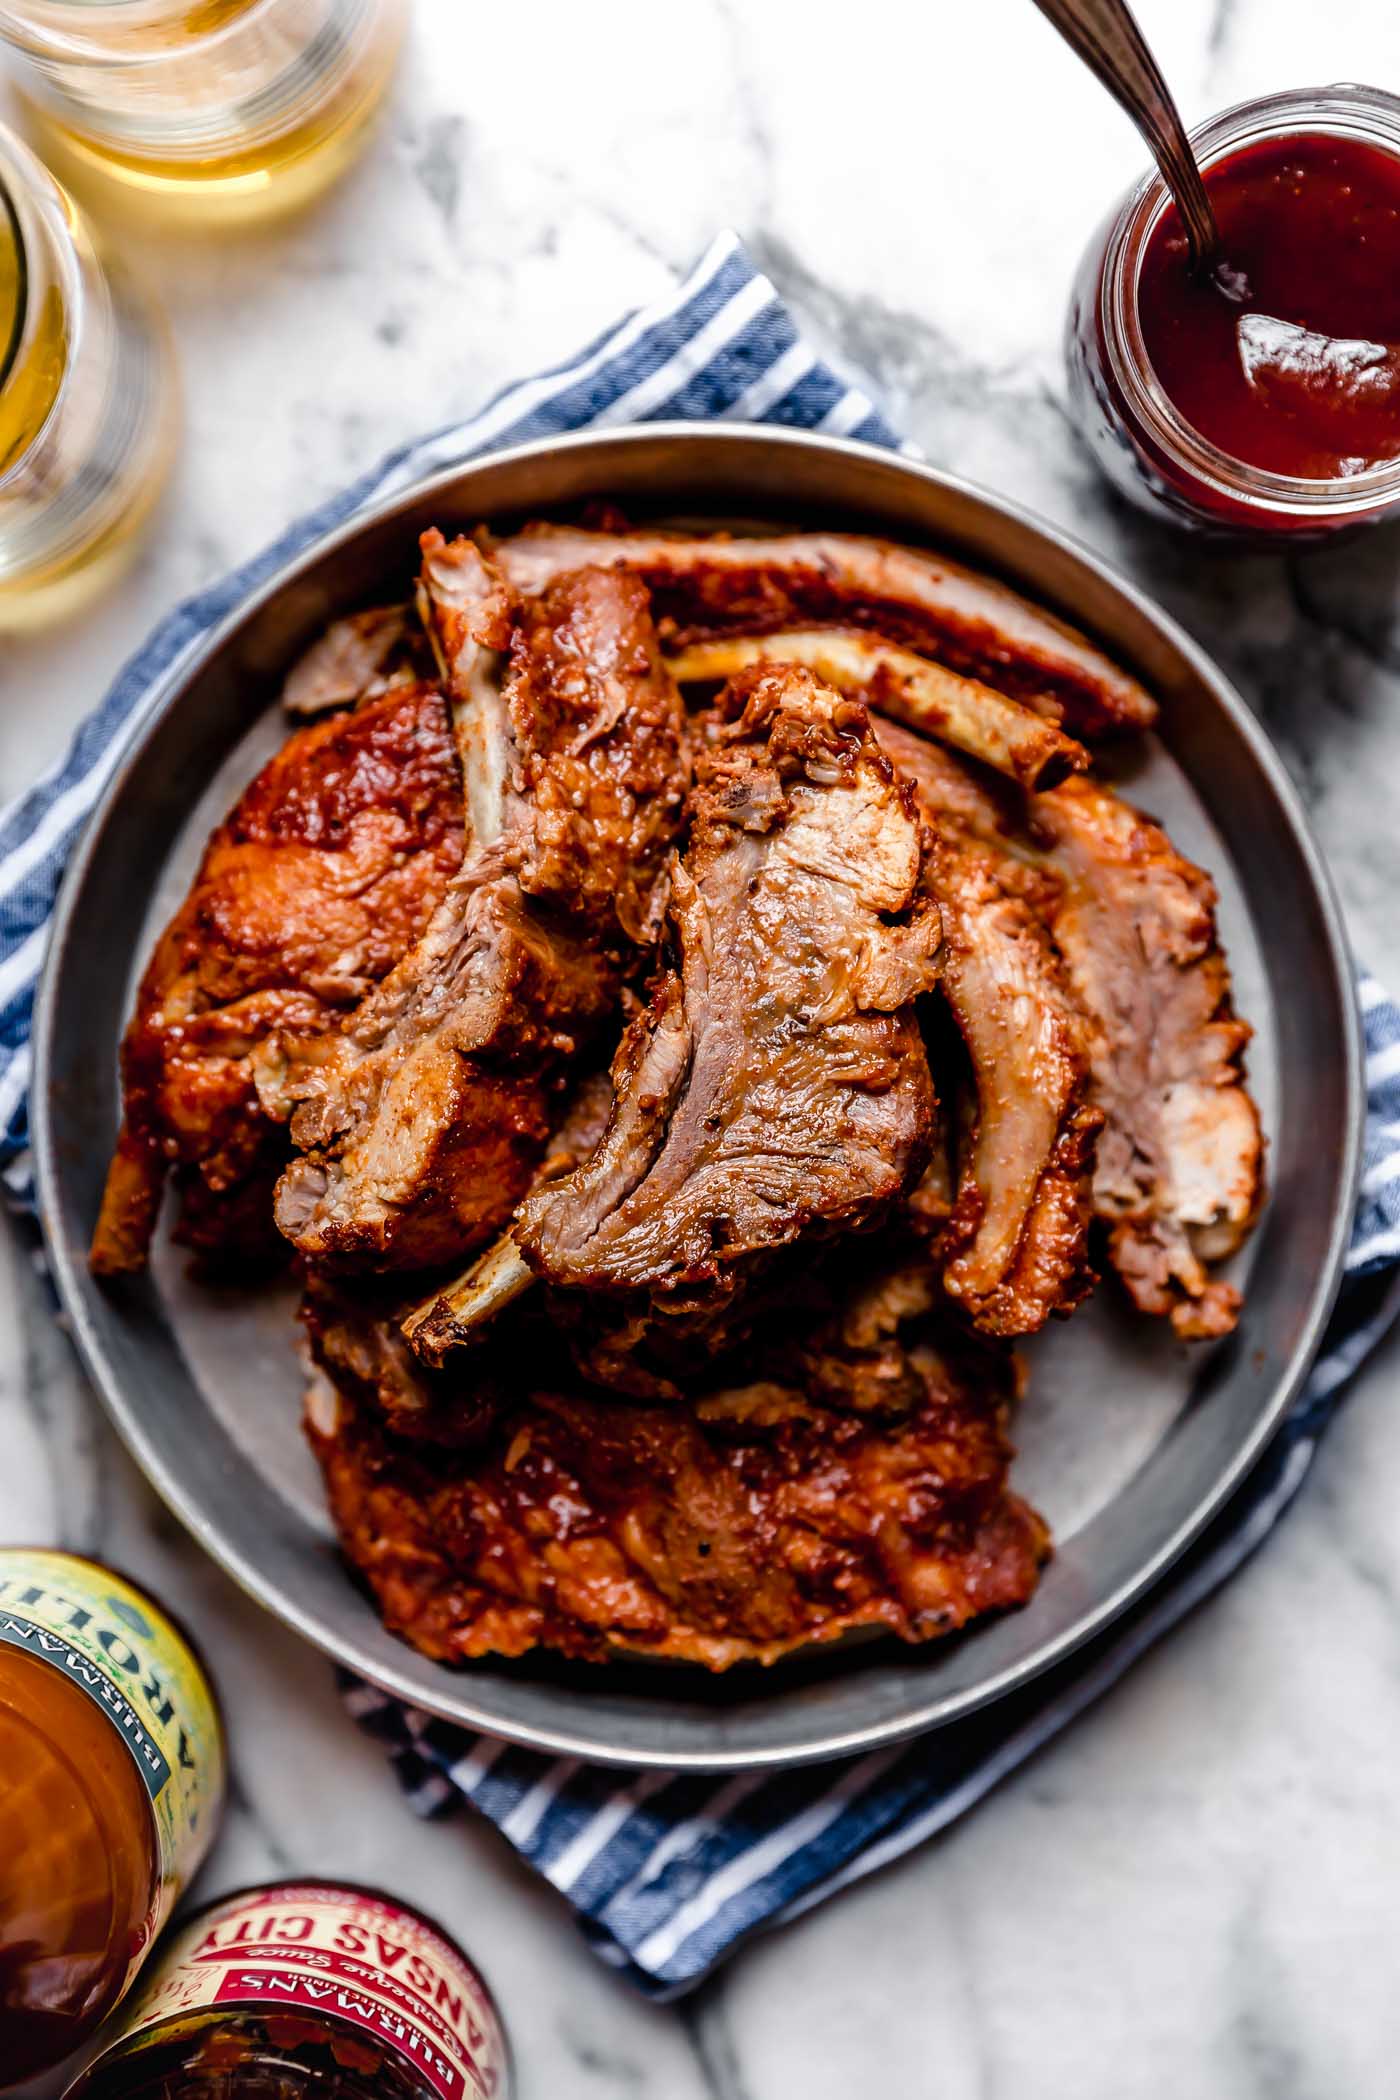 Baby back ribs served in a round metal dish, with BBQ sauce & beer. The dish is sitting on a blue & white striped linen atop a white marble surface. 